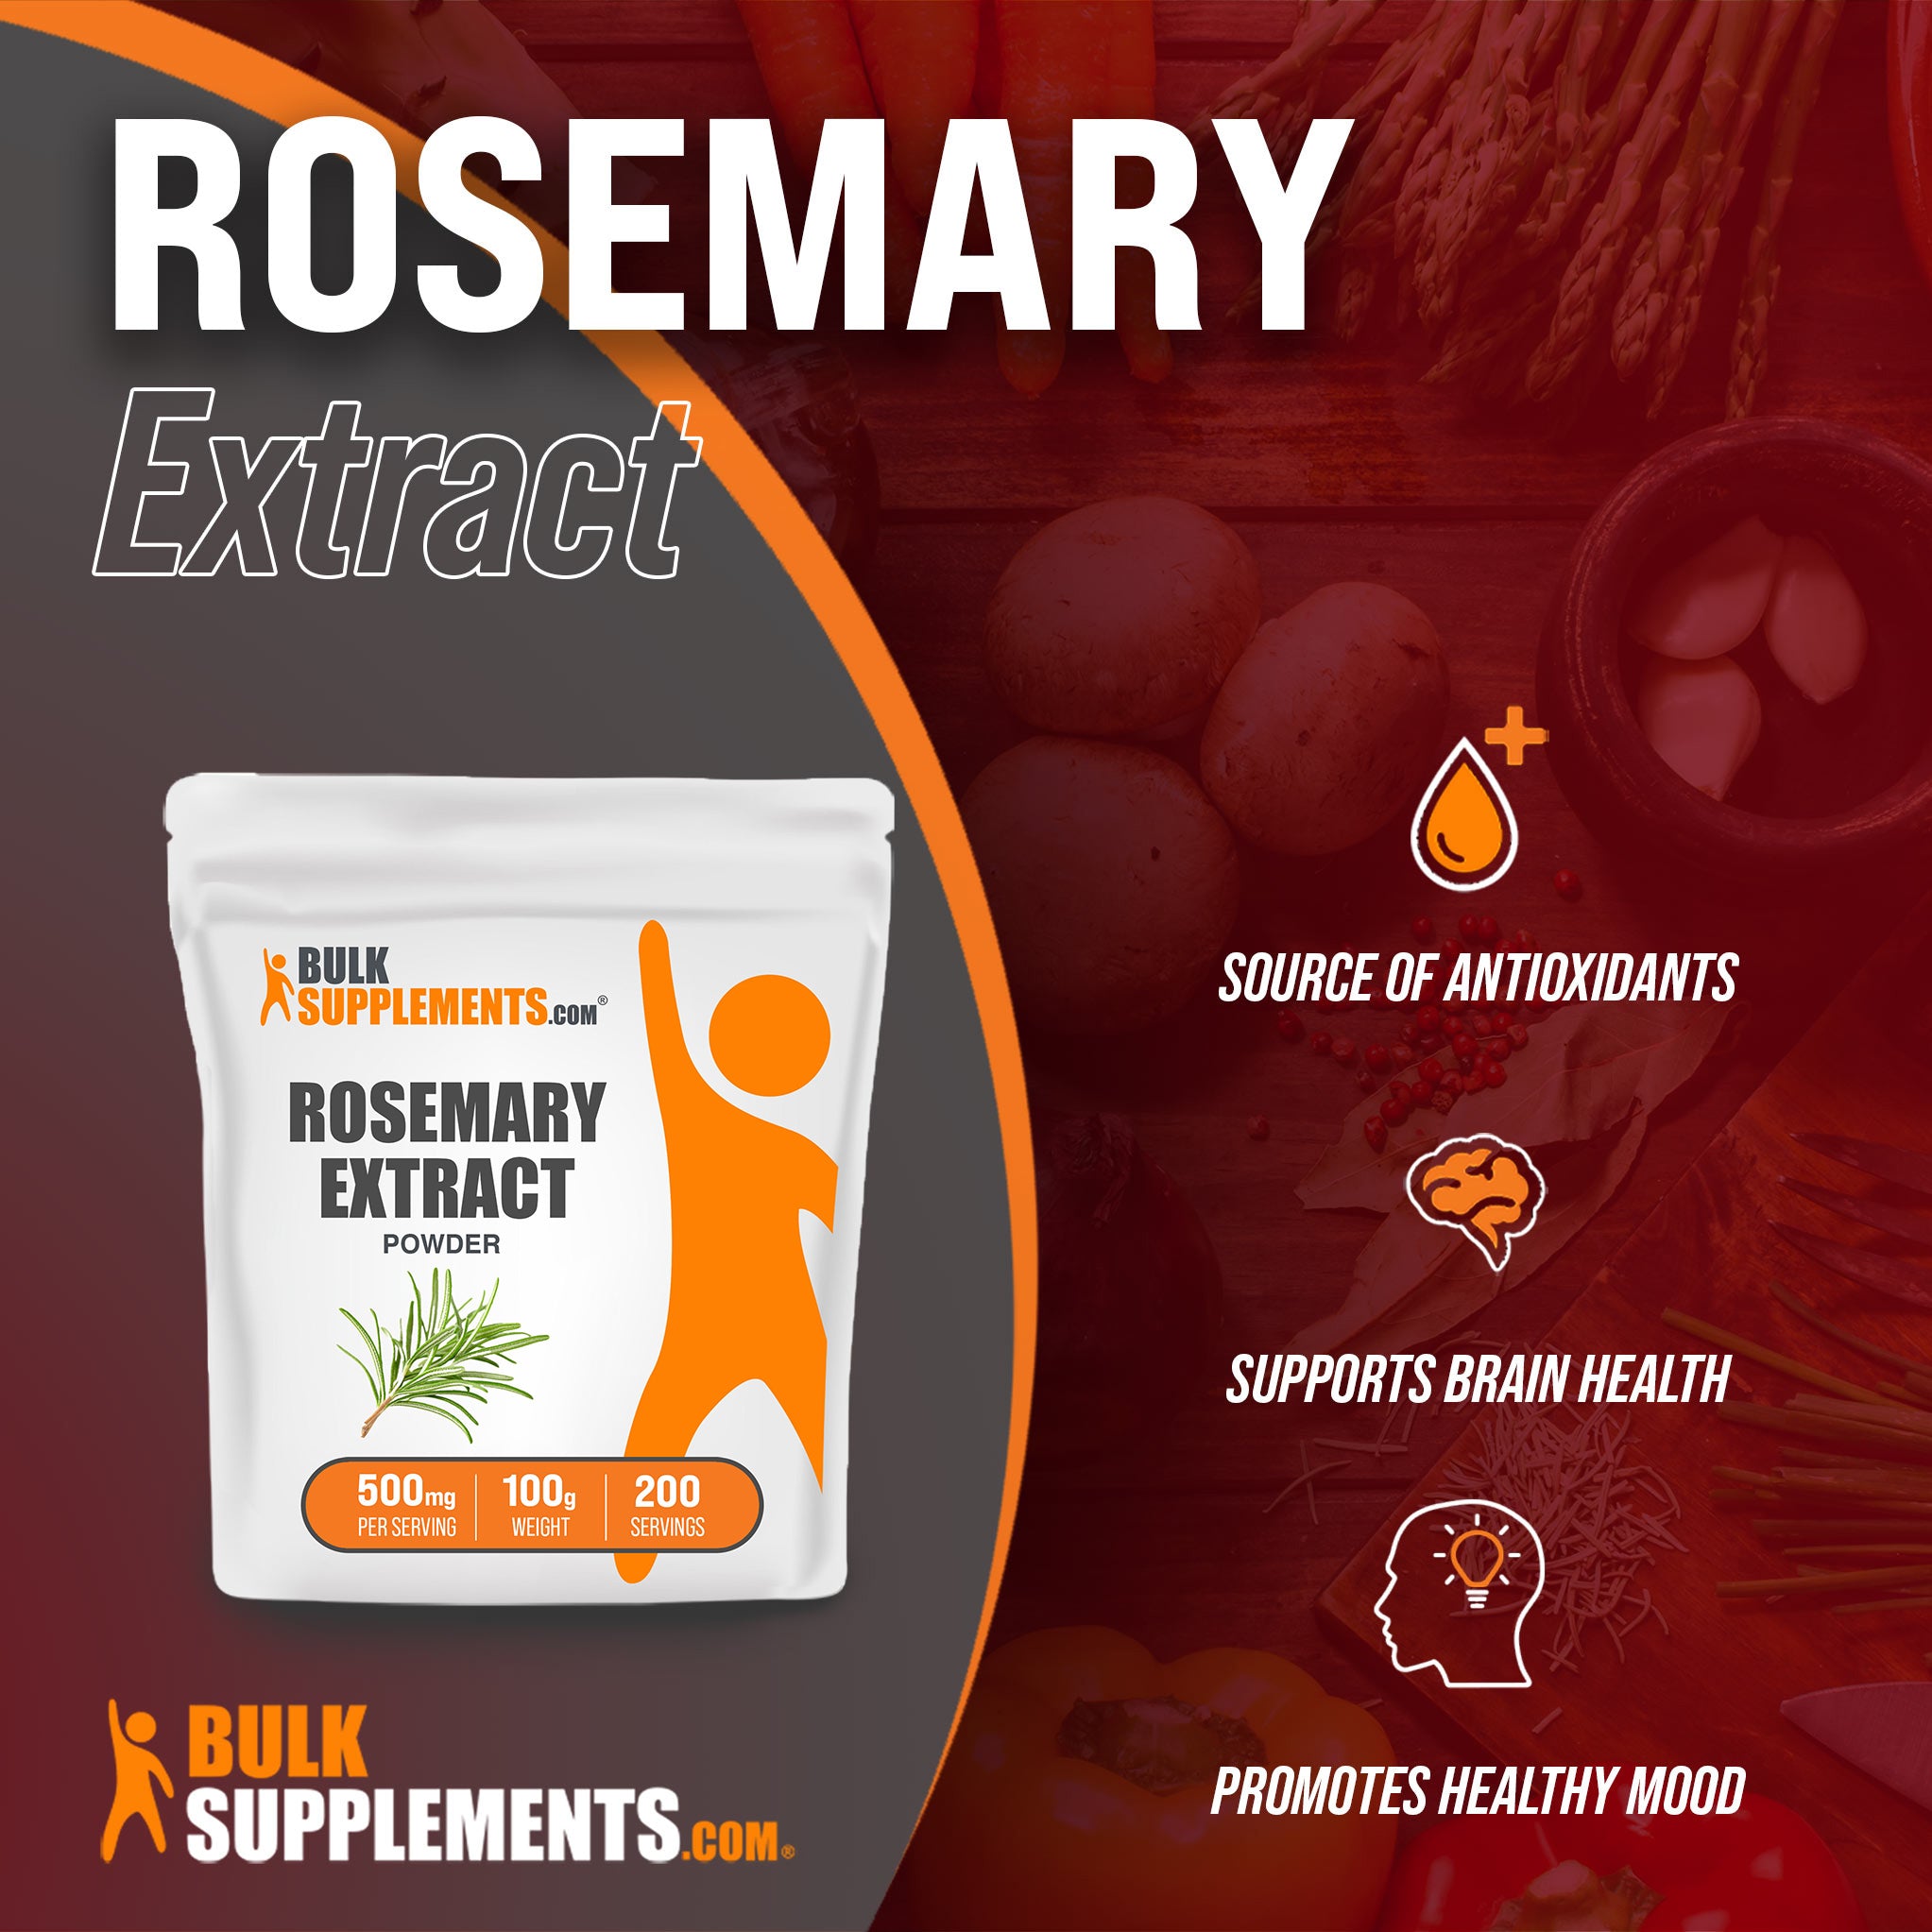 Benefits of Rosemary Extract: source of antioxidants, supports brain health, promotes healthy mood